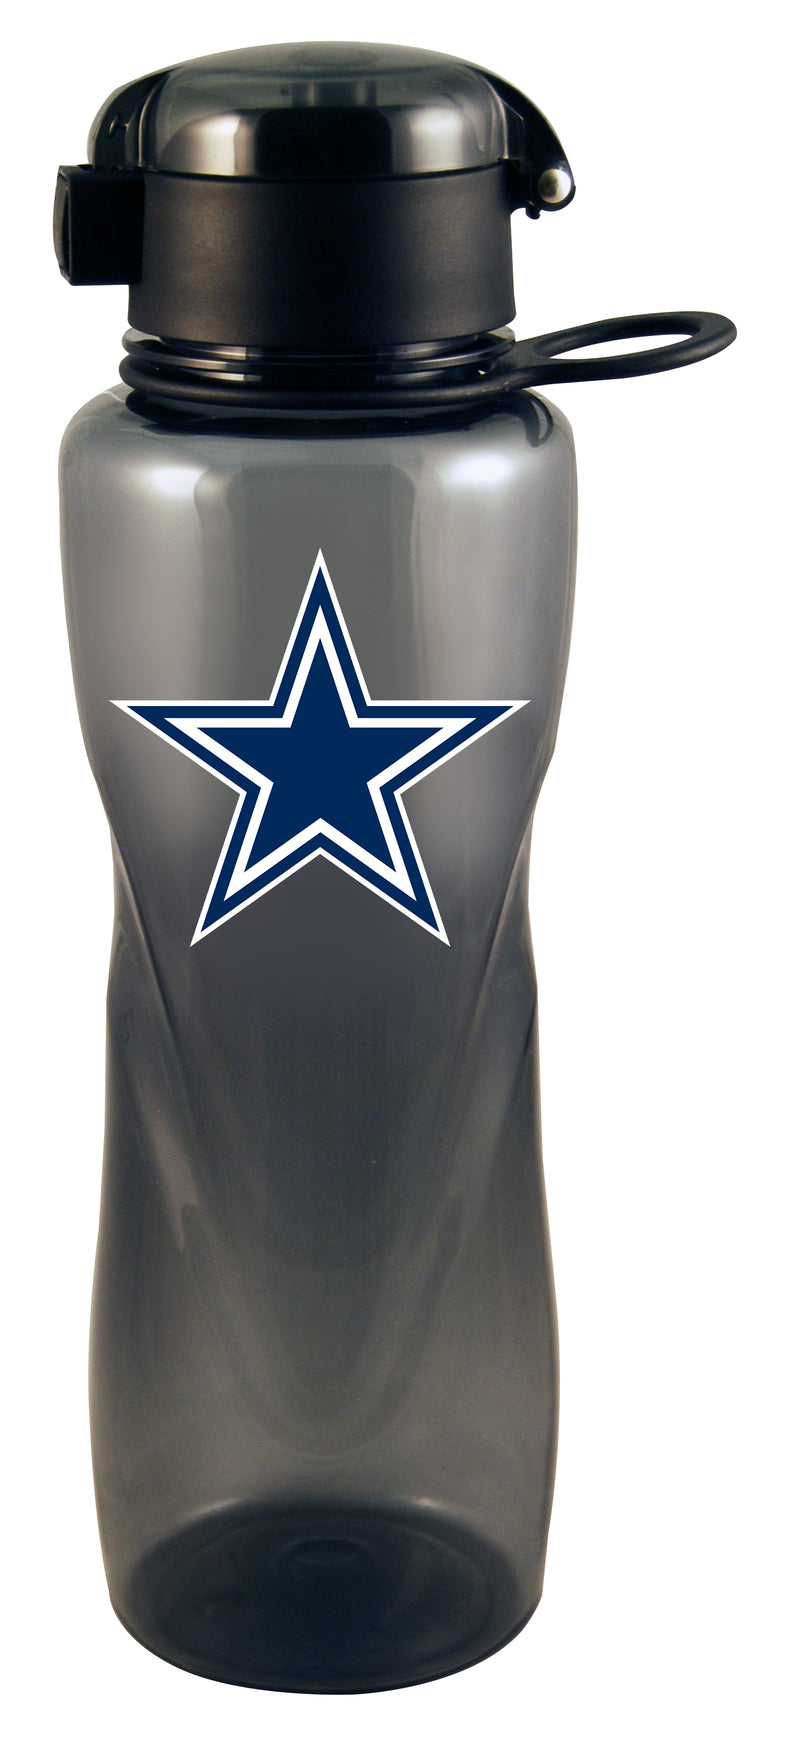 Tritan Flip Top Water Bottle | Dallas Cowboys
DAL, Dallas Cowboys, Drinkware_category_All, NFL, OldProduct, Tritan, Water Bottle
The Memory Company